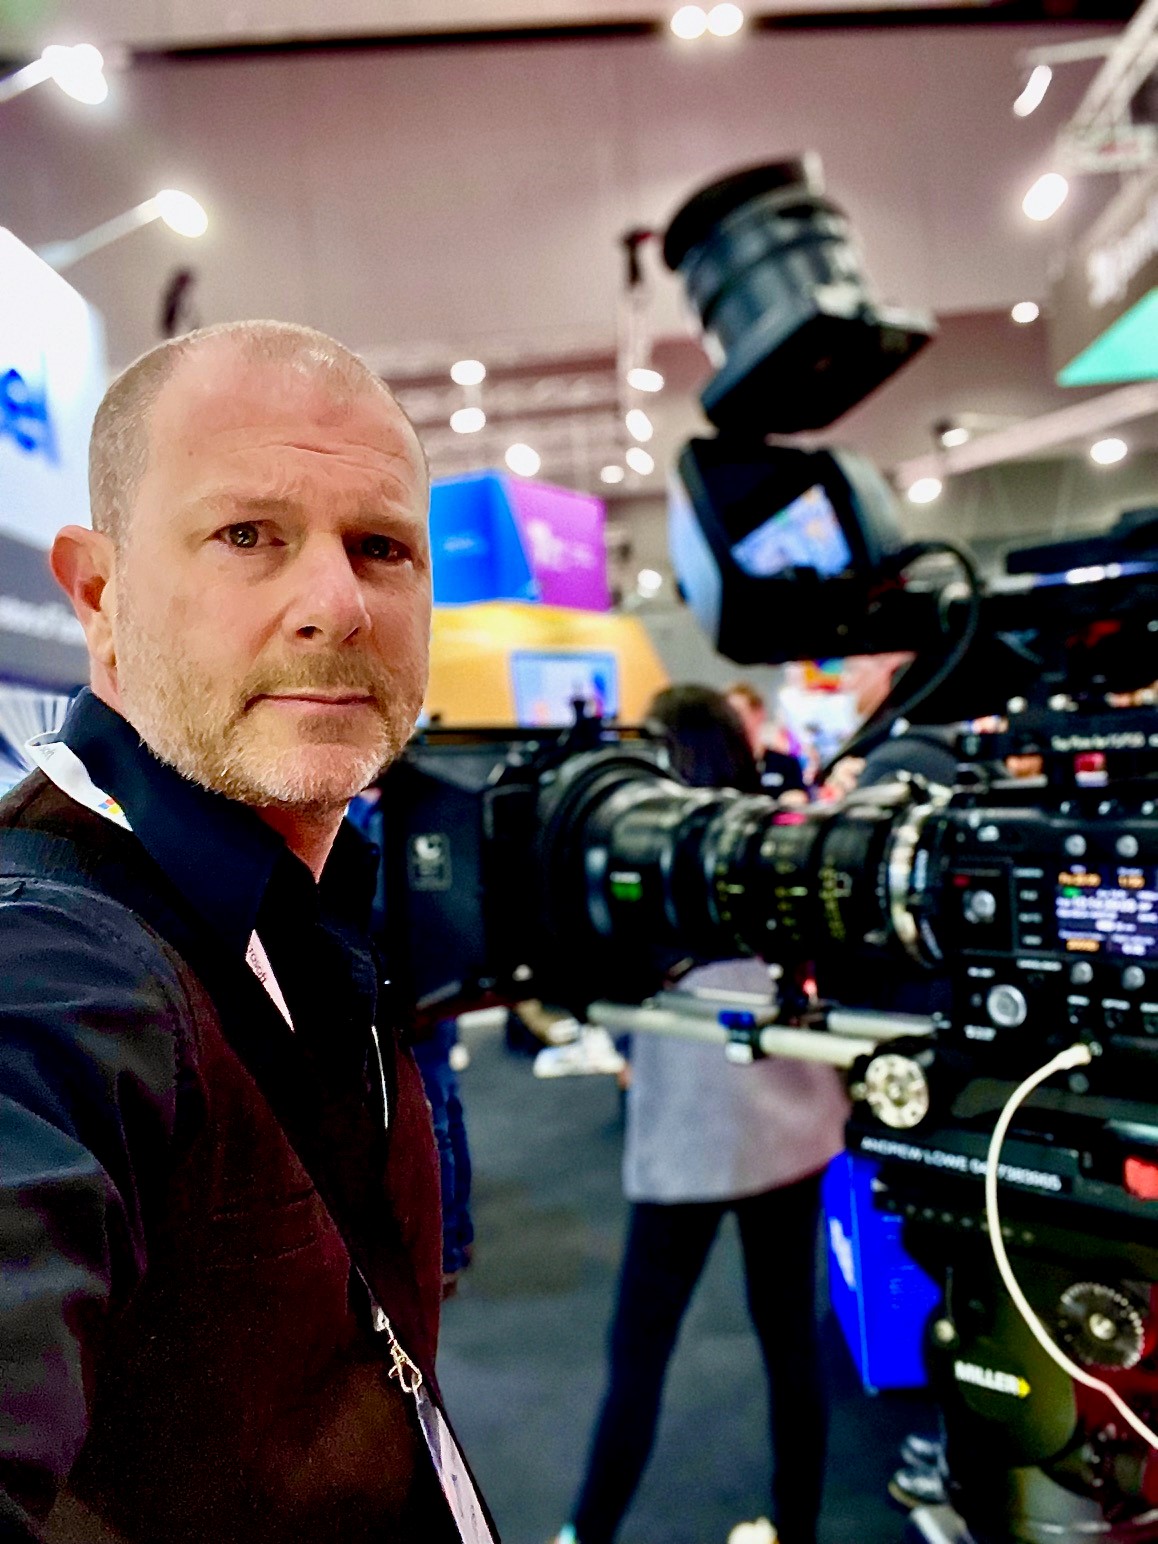 Director Josh Rockman with Sony f5 camera at an event